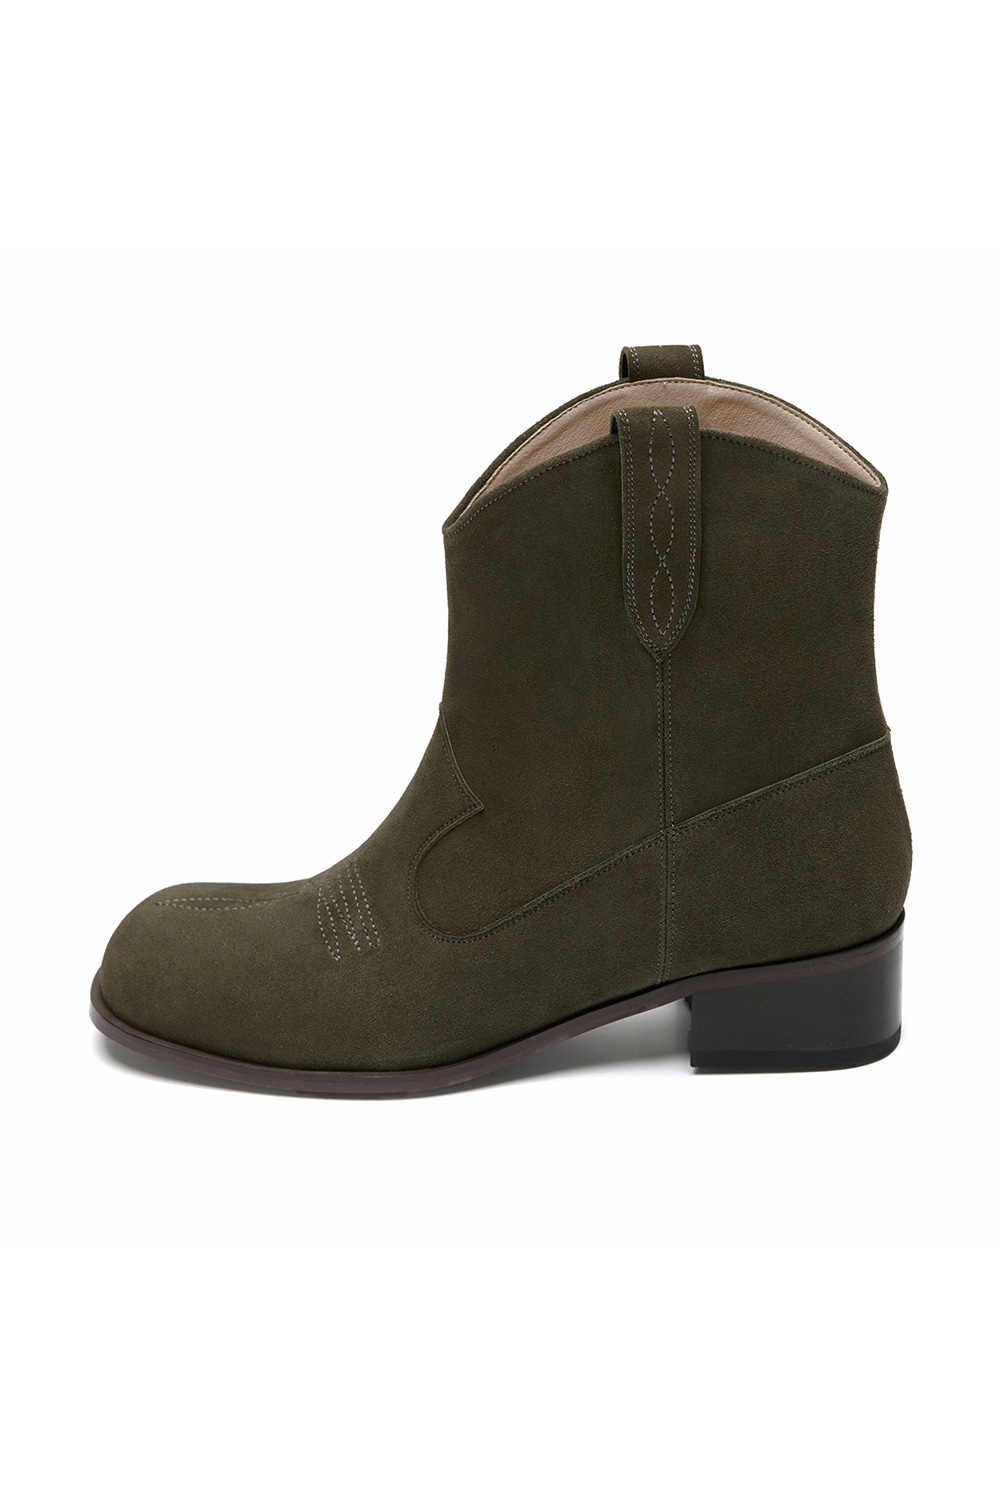 WESTERN ROUND SQUARE TOE MIDDLE BOOTS [KHAKI]		